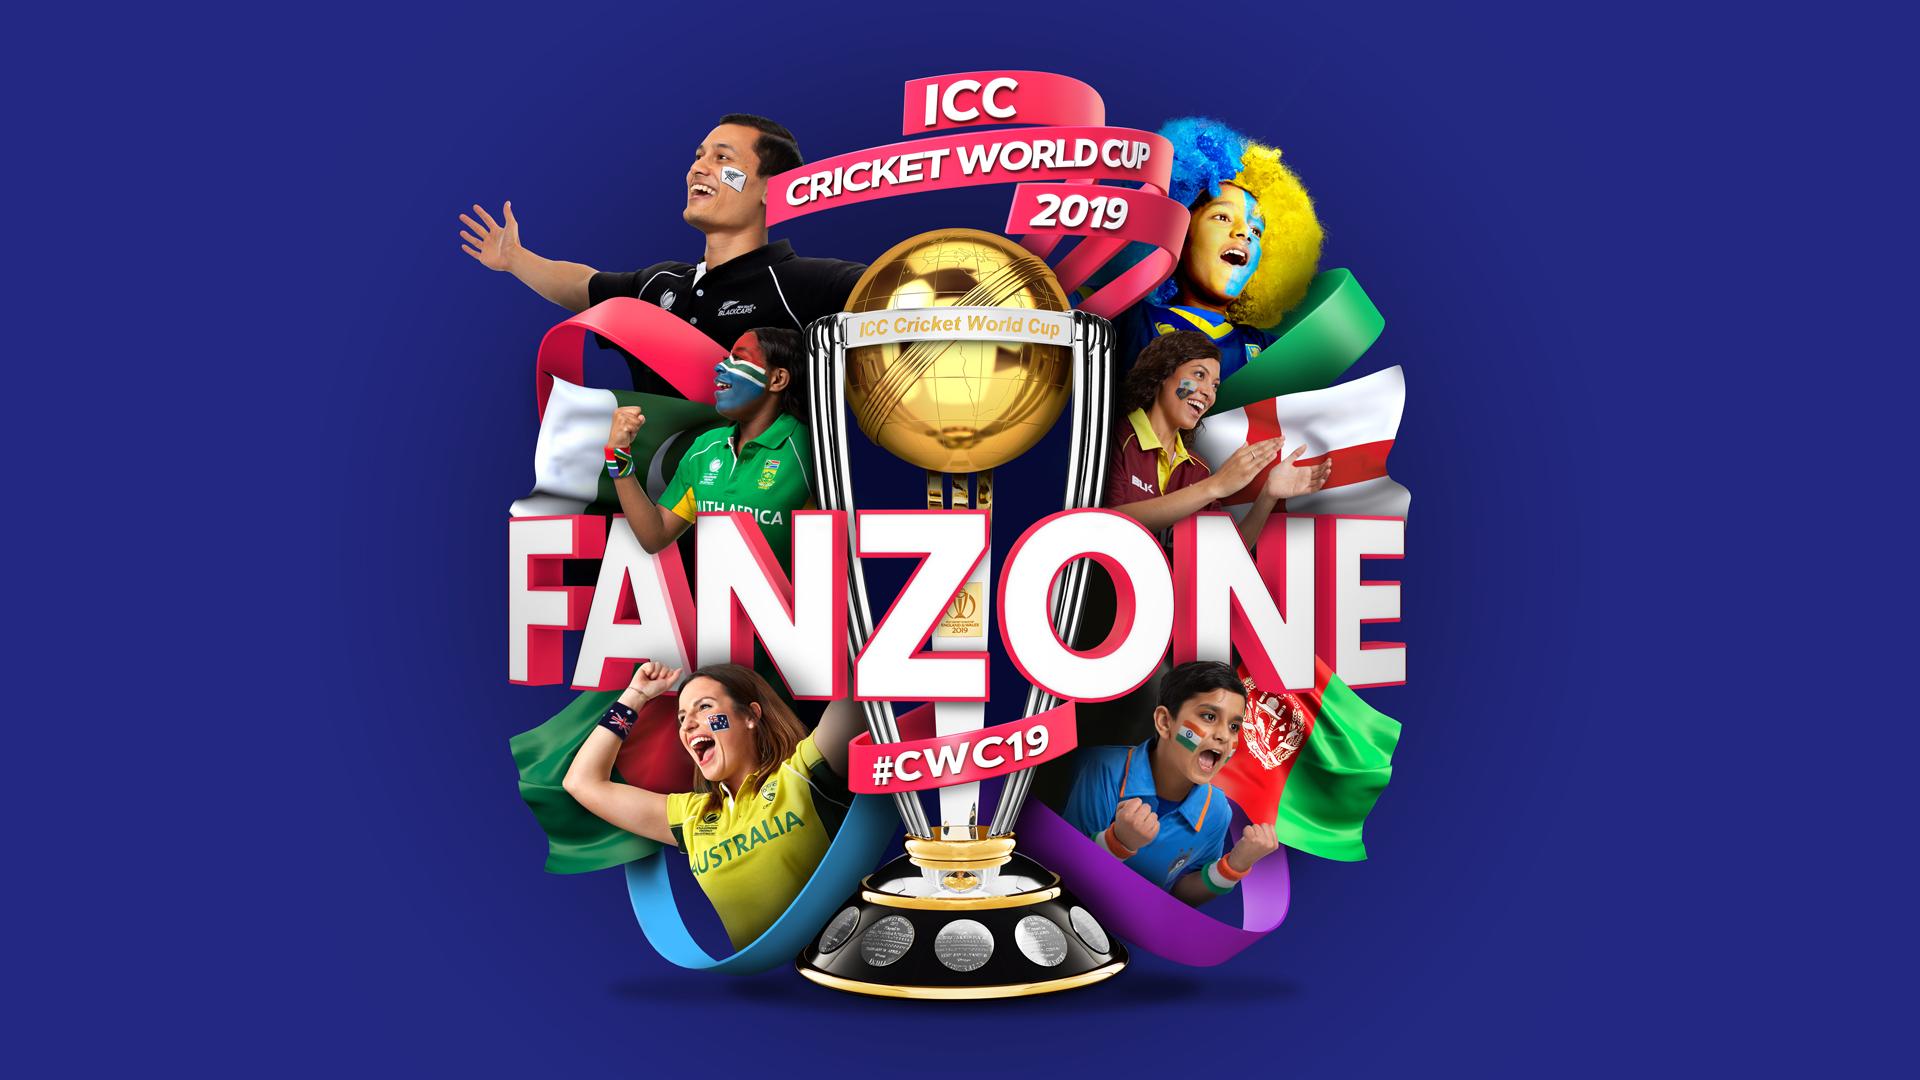 Visit a Cricket World Cup Fanzone near you!